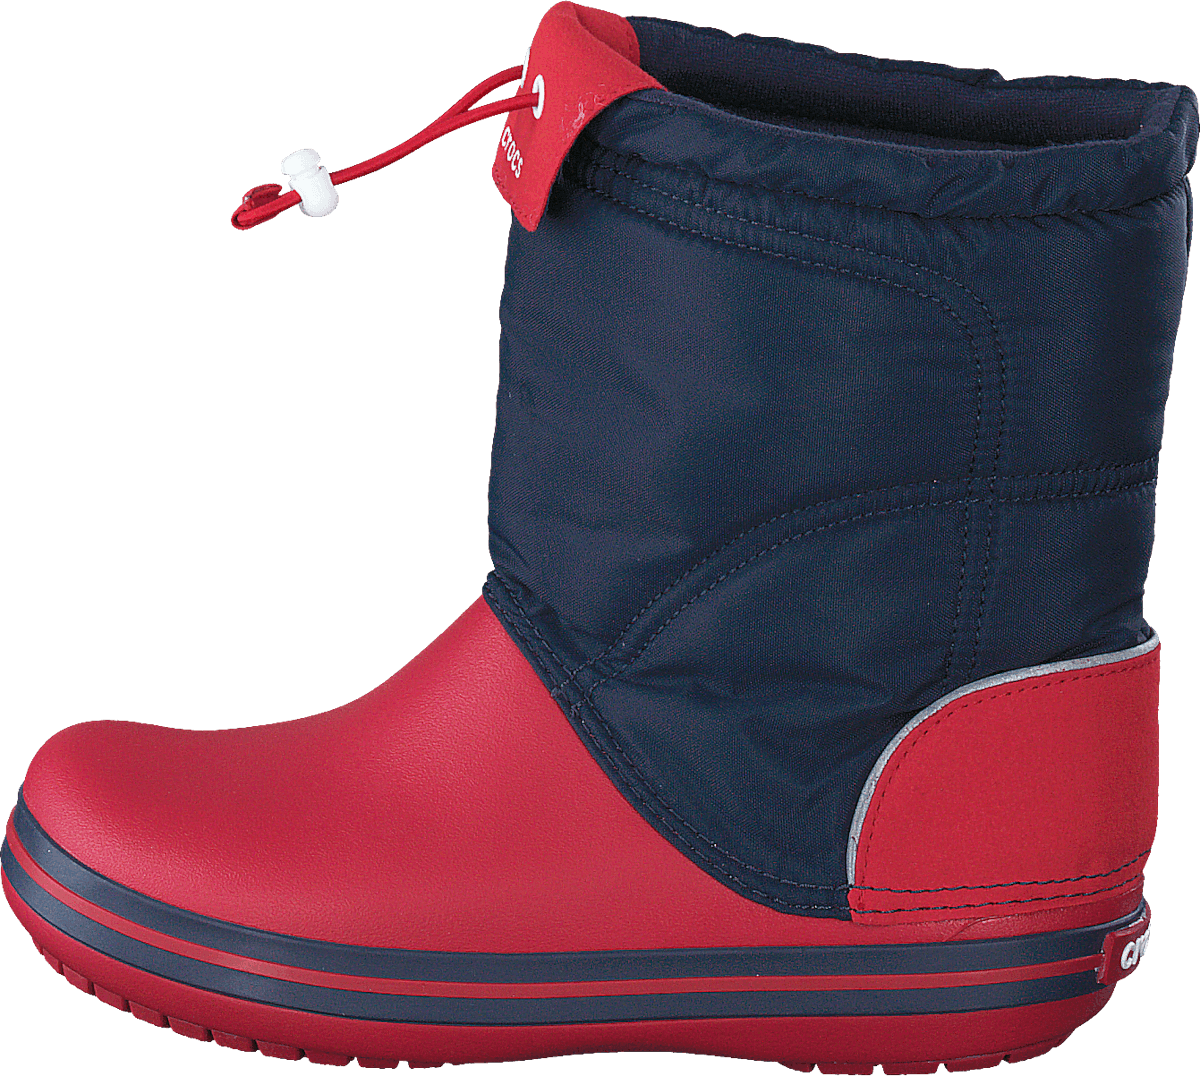 Crocband LodgePoint Boot K Navy/Red